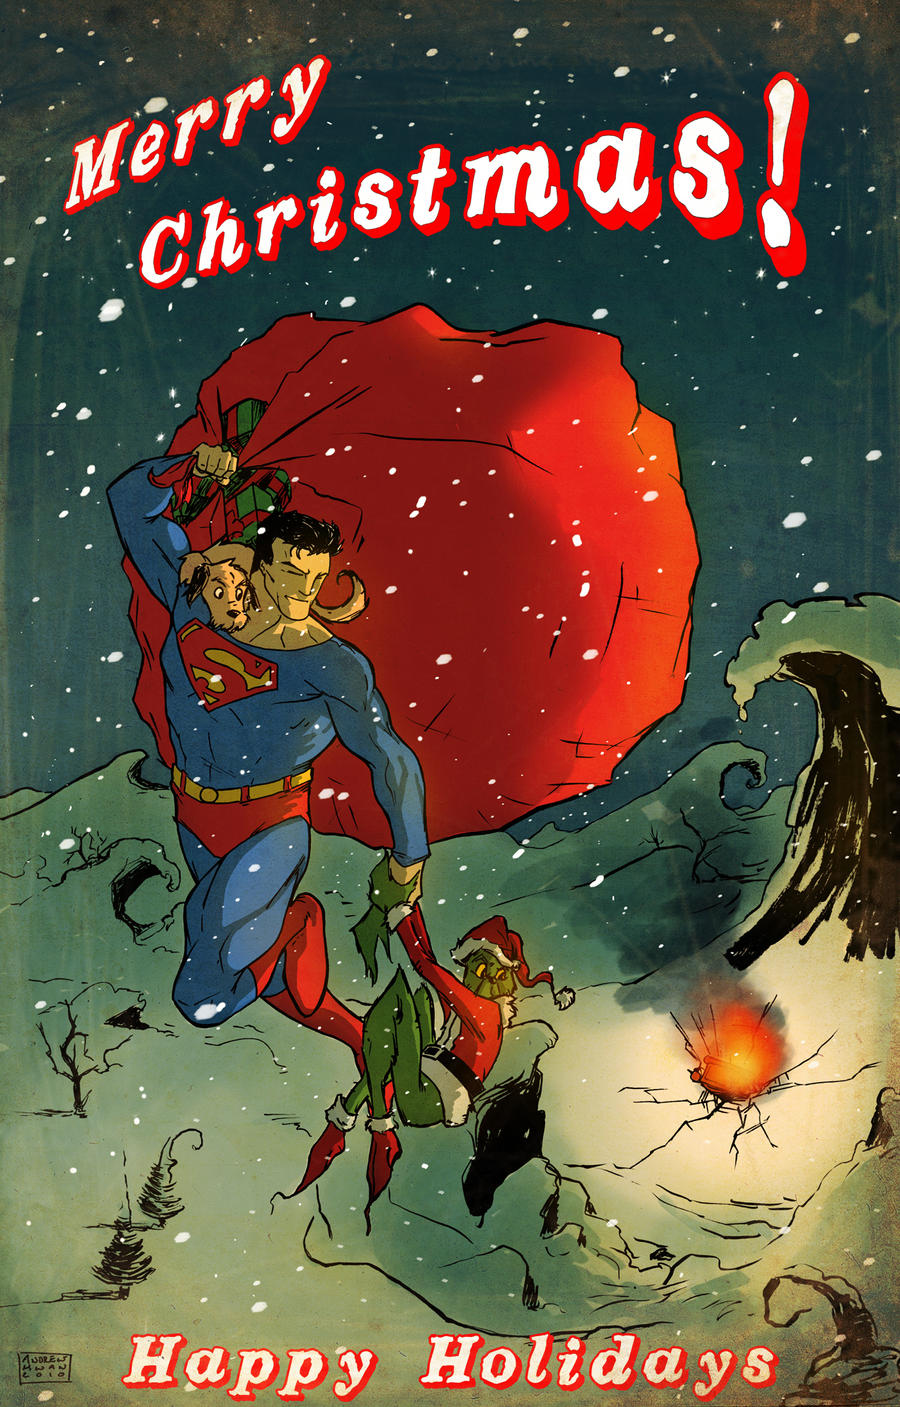 Merry Christmas 2014 wishes images superman